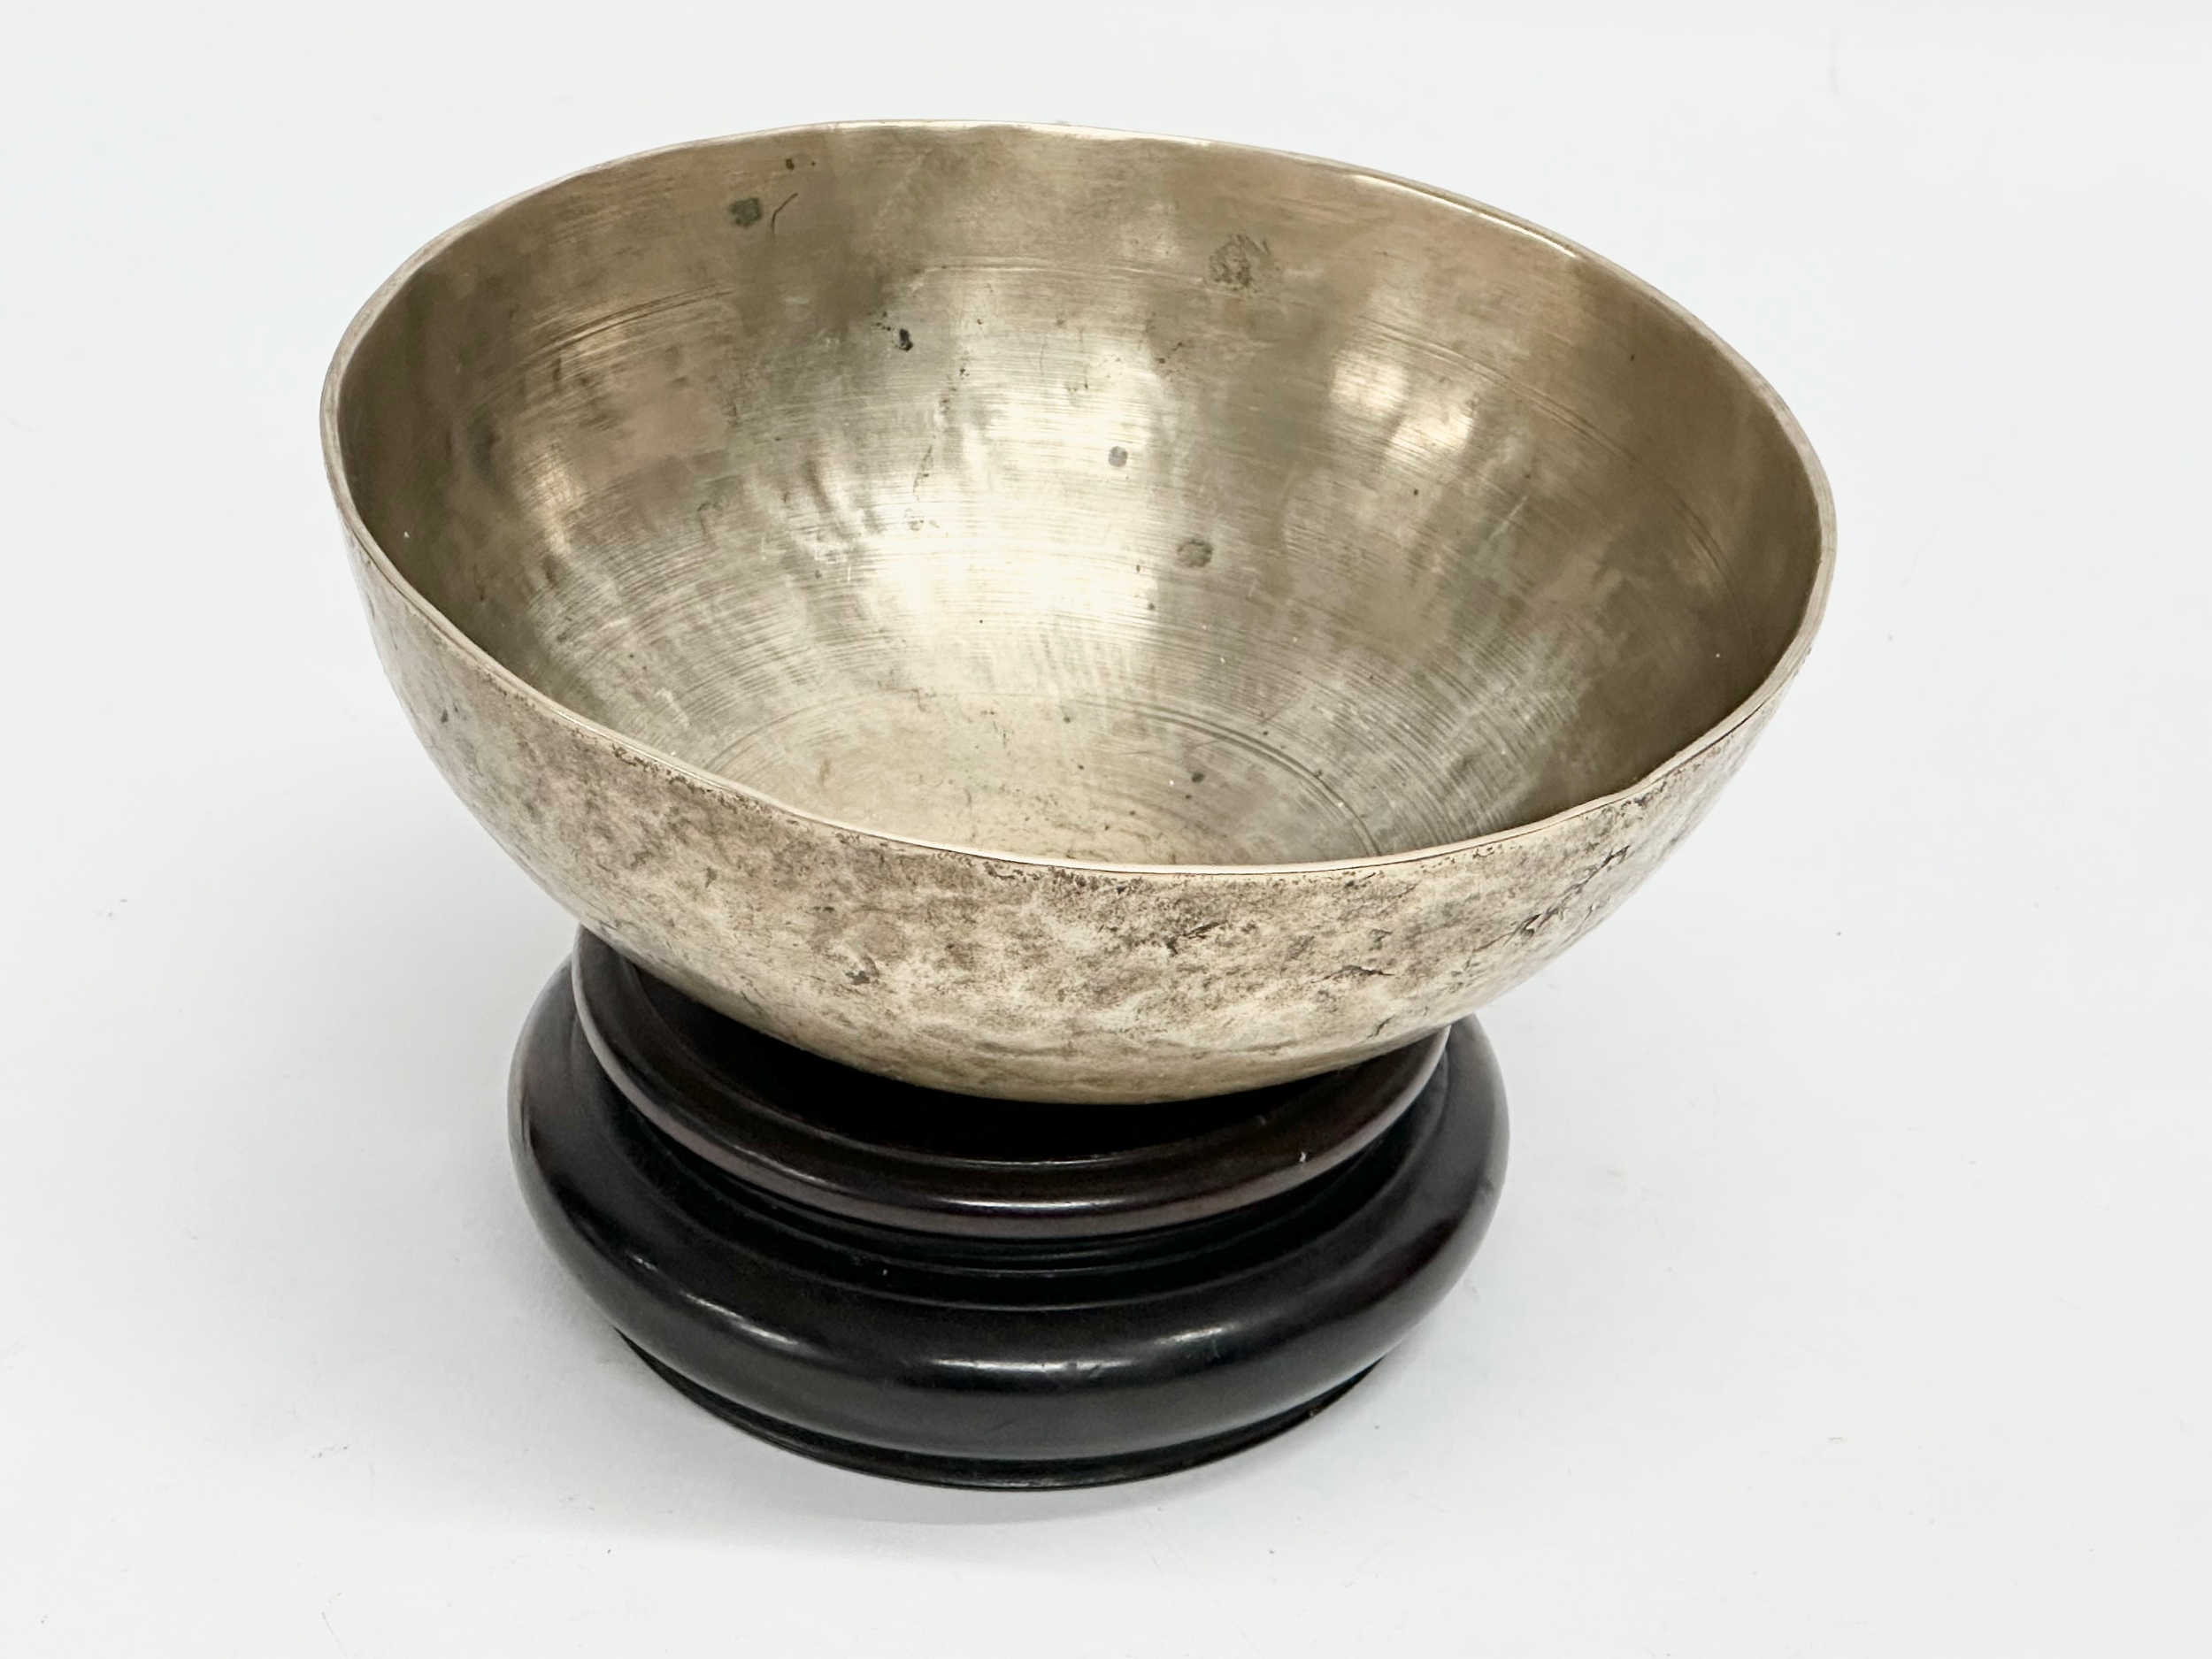 A Late 19th Century Tibetan Singing bowl on stand. Bowl measures 16x6cm - Image 2 of 5